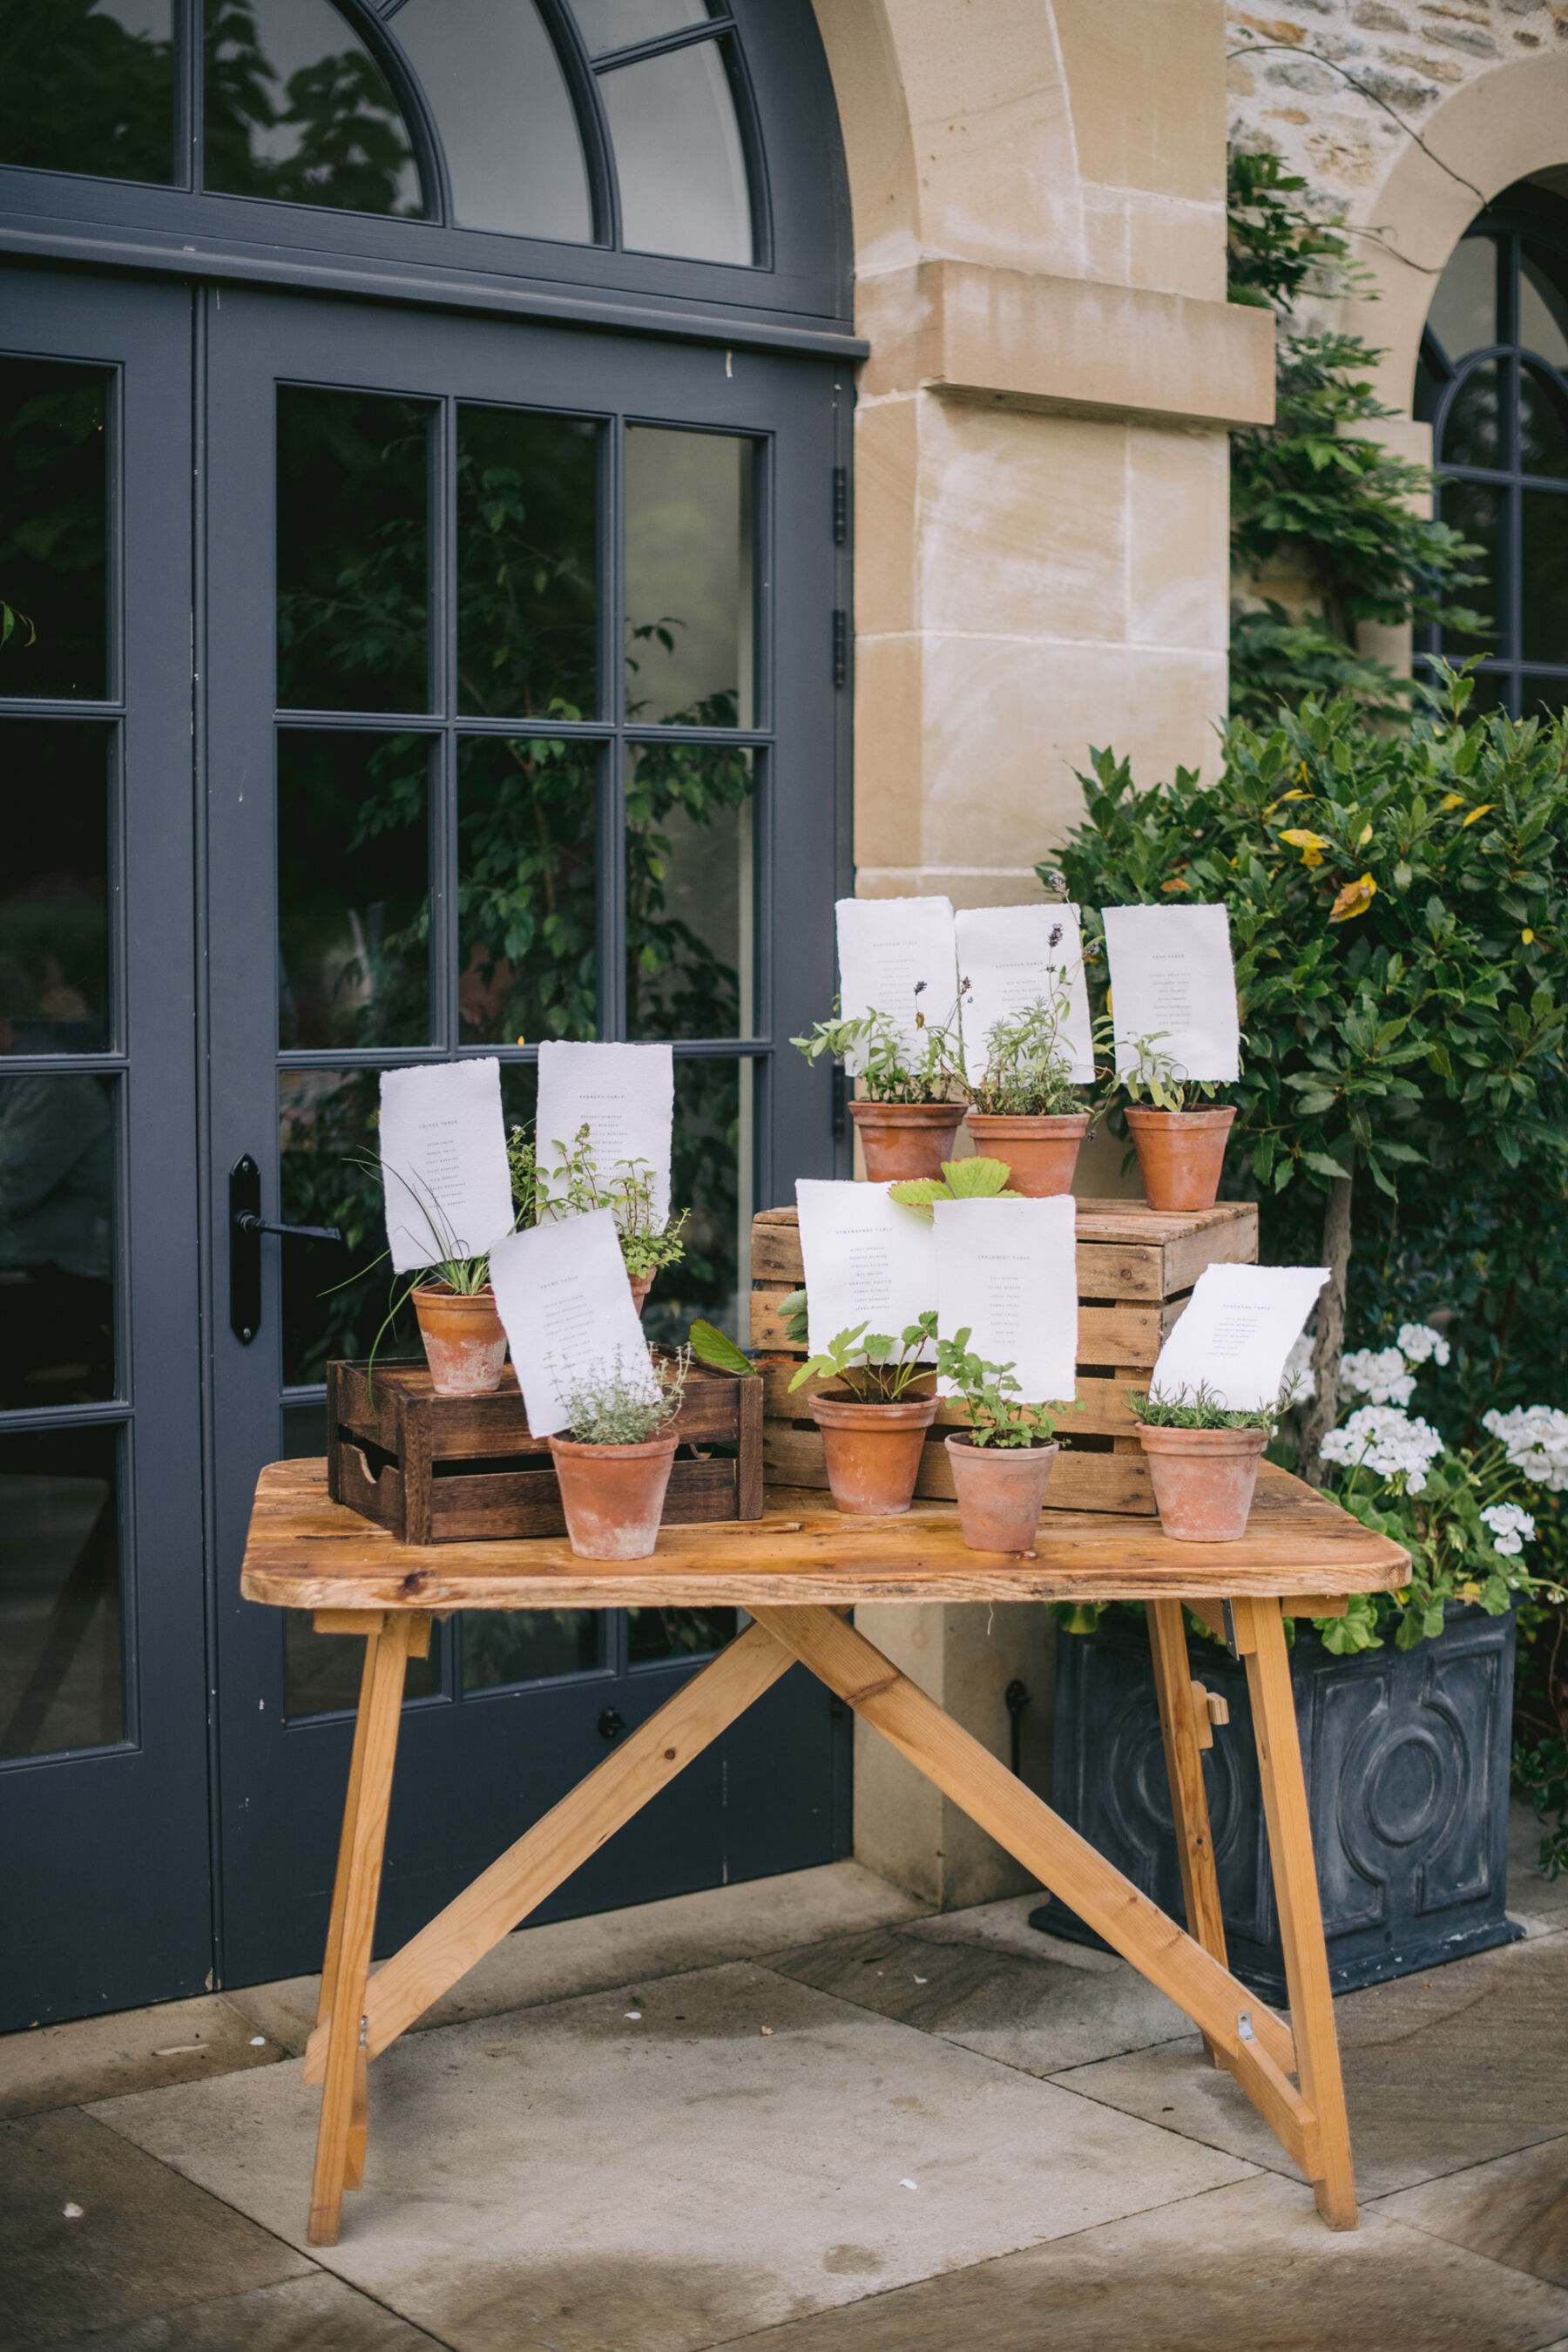 Potted plants with wedding table names in them.